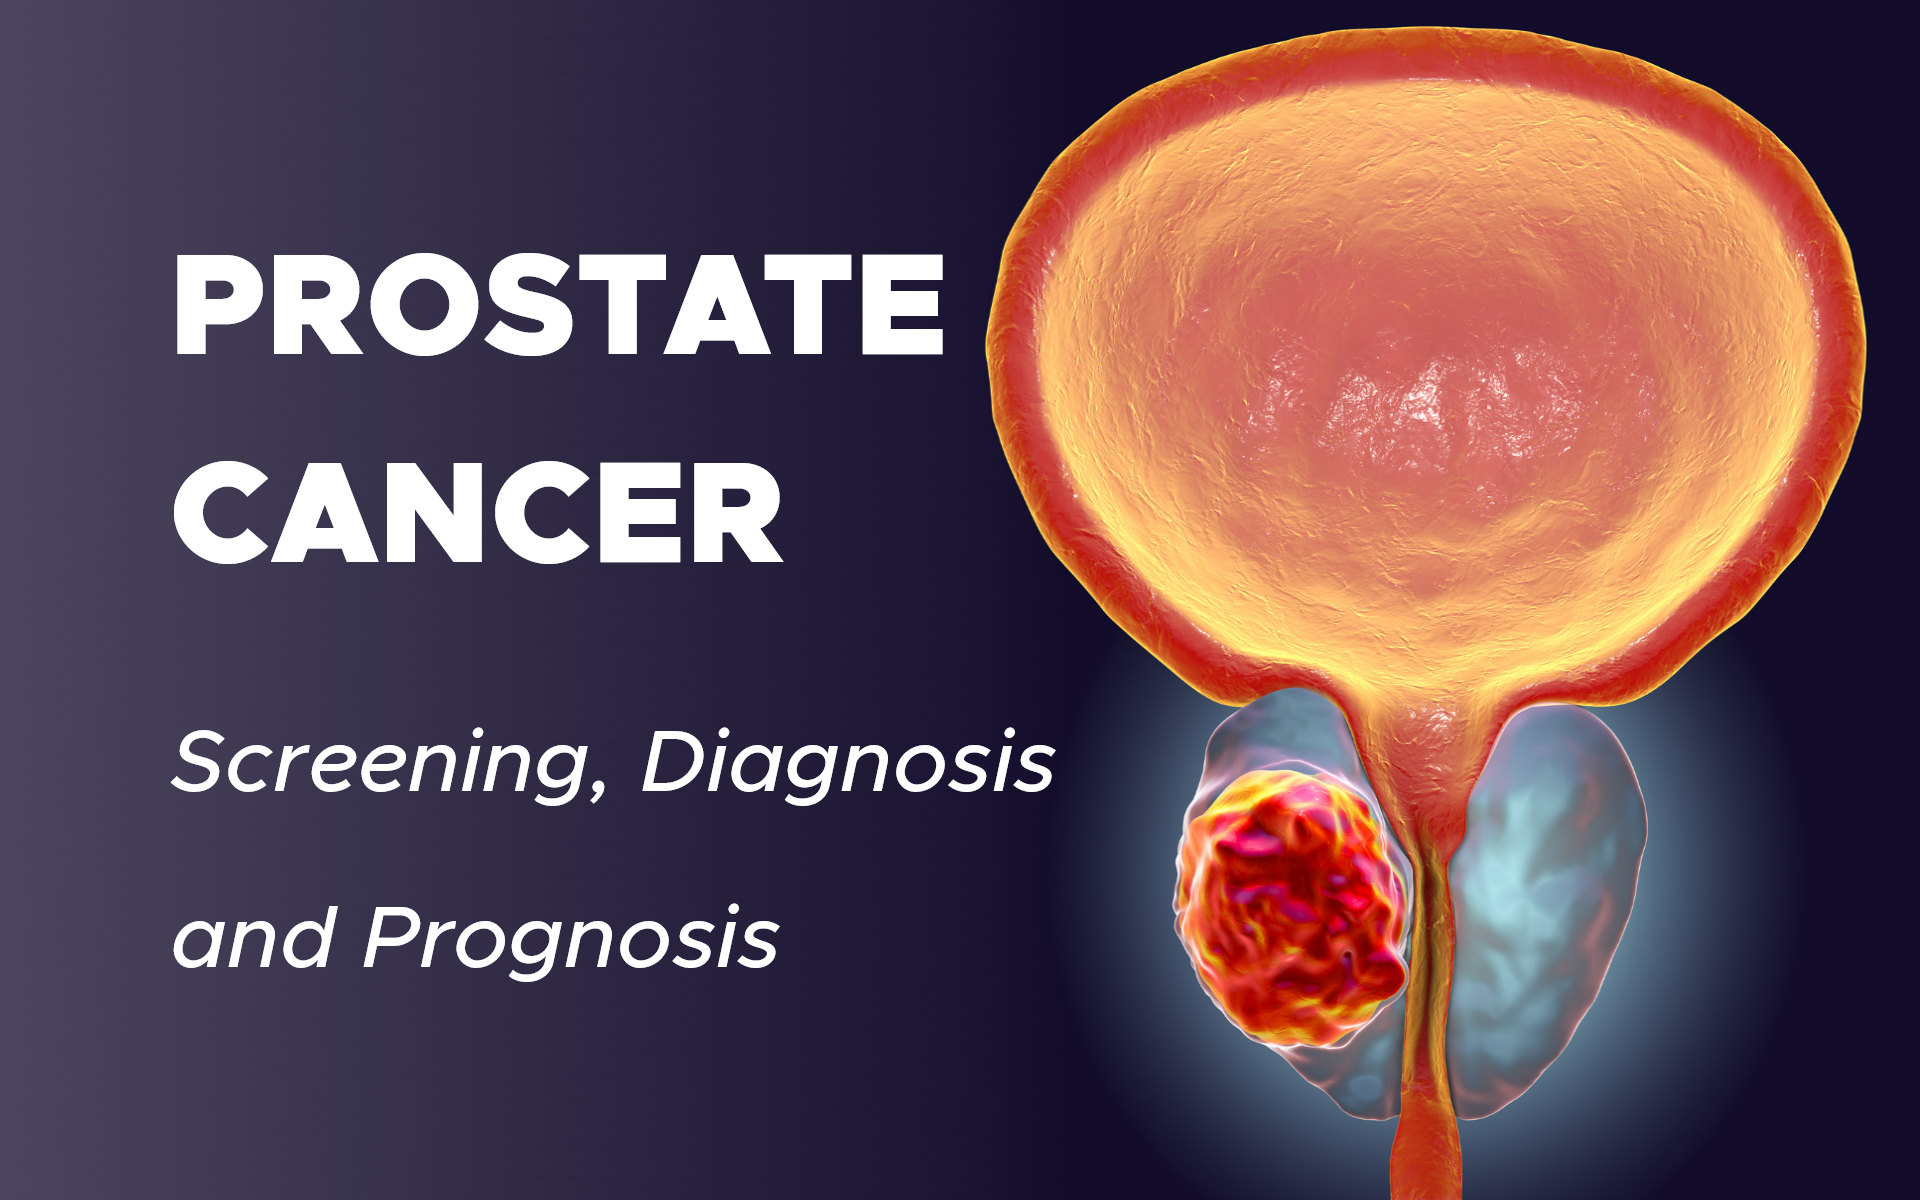 Prostate Cancer: Screening, Diagnosis and Prognosis